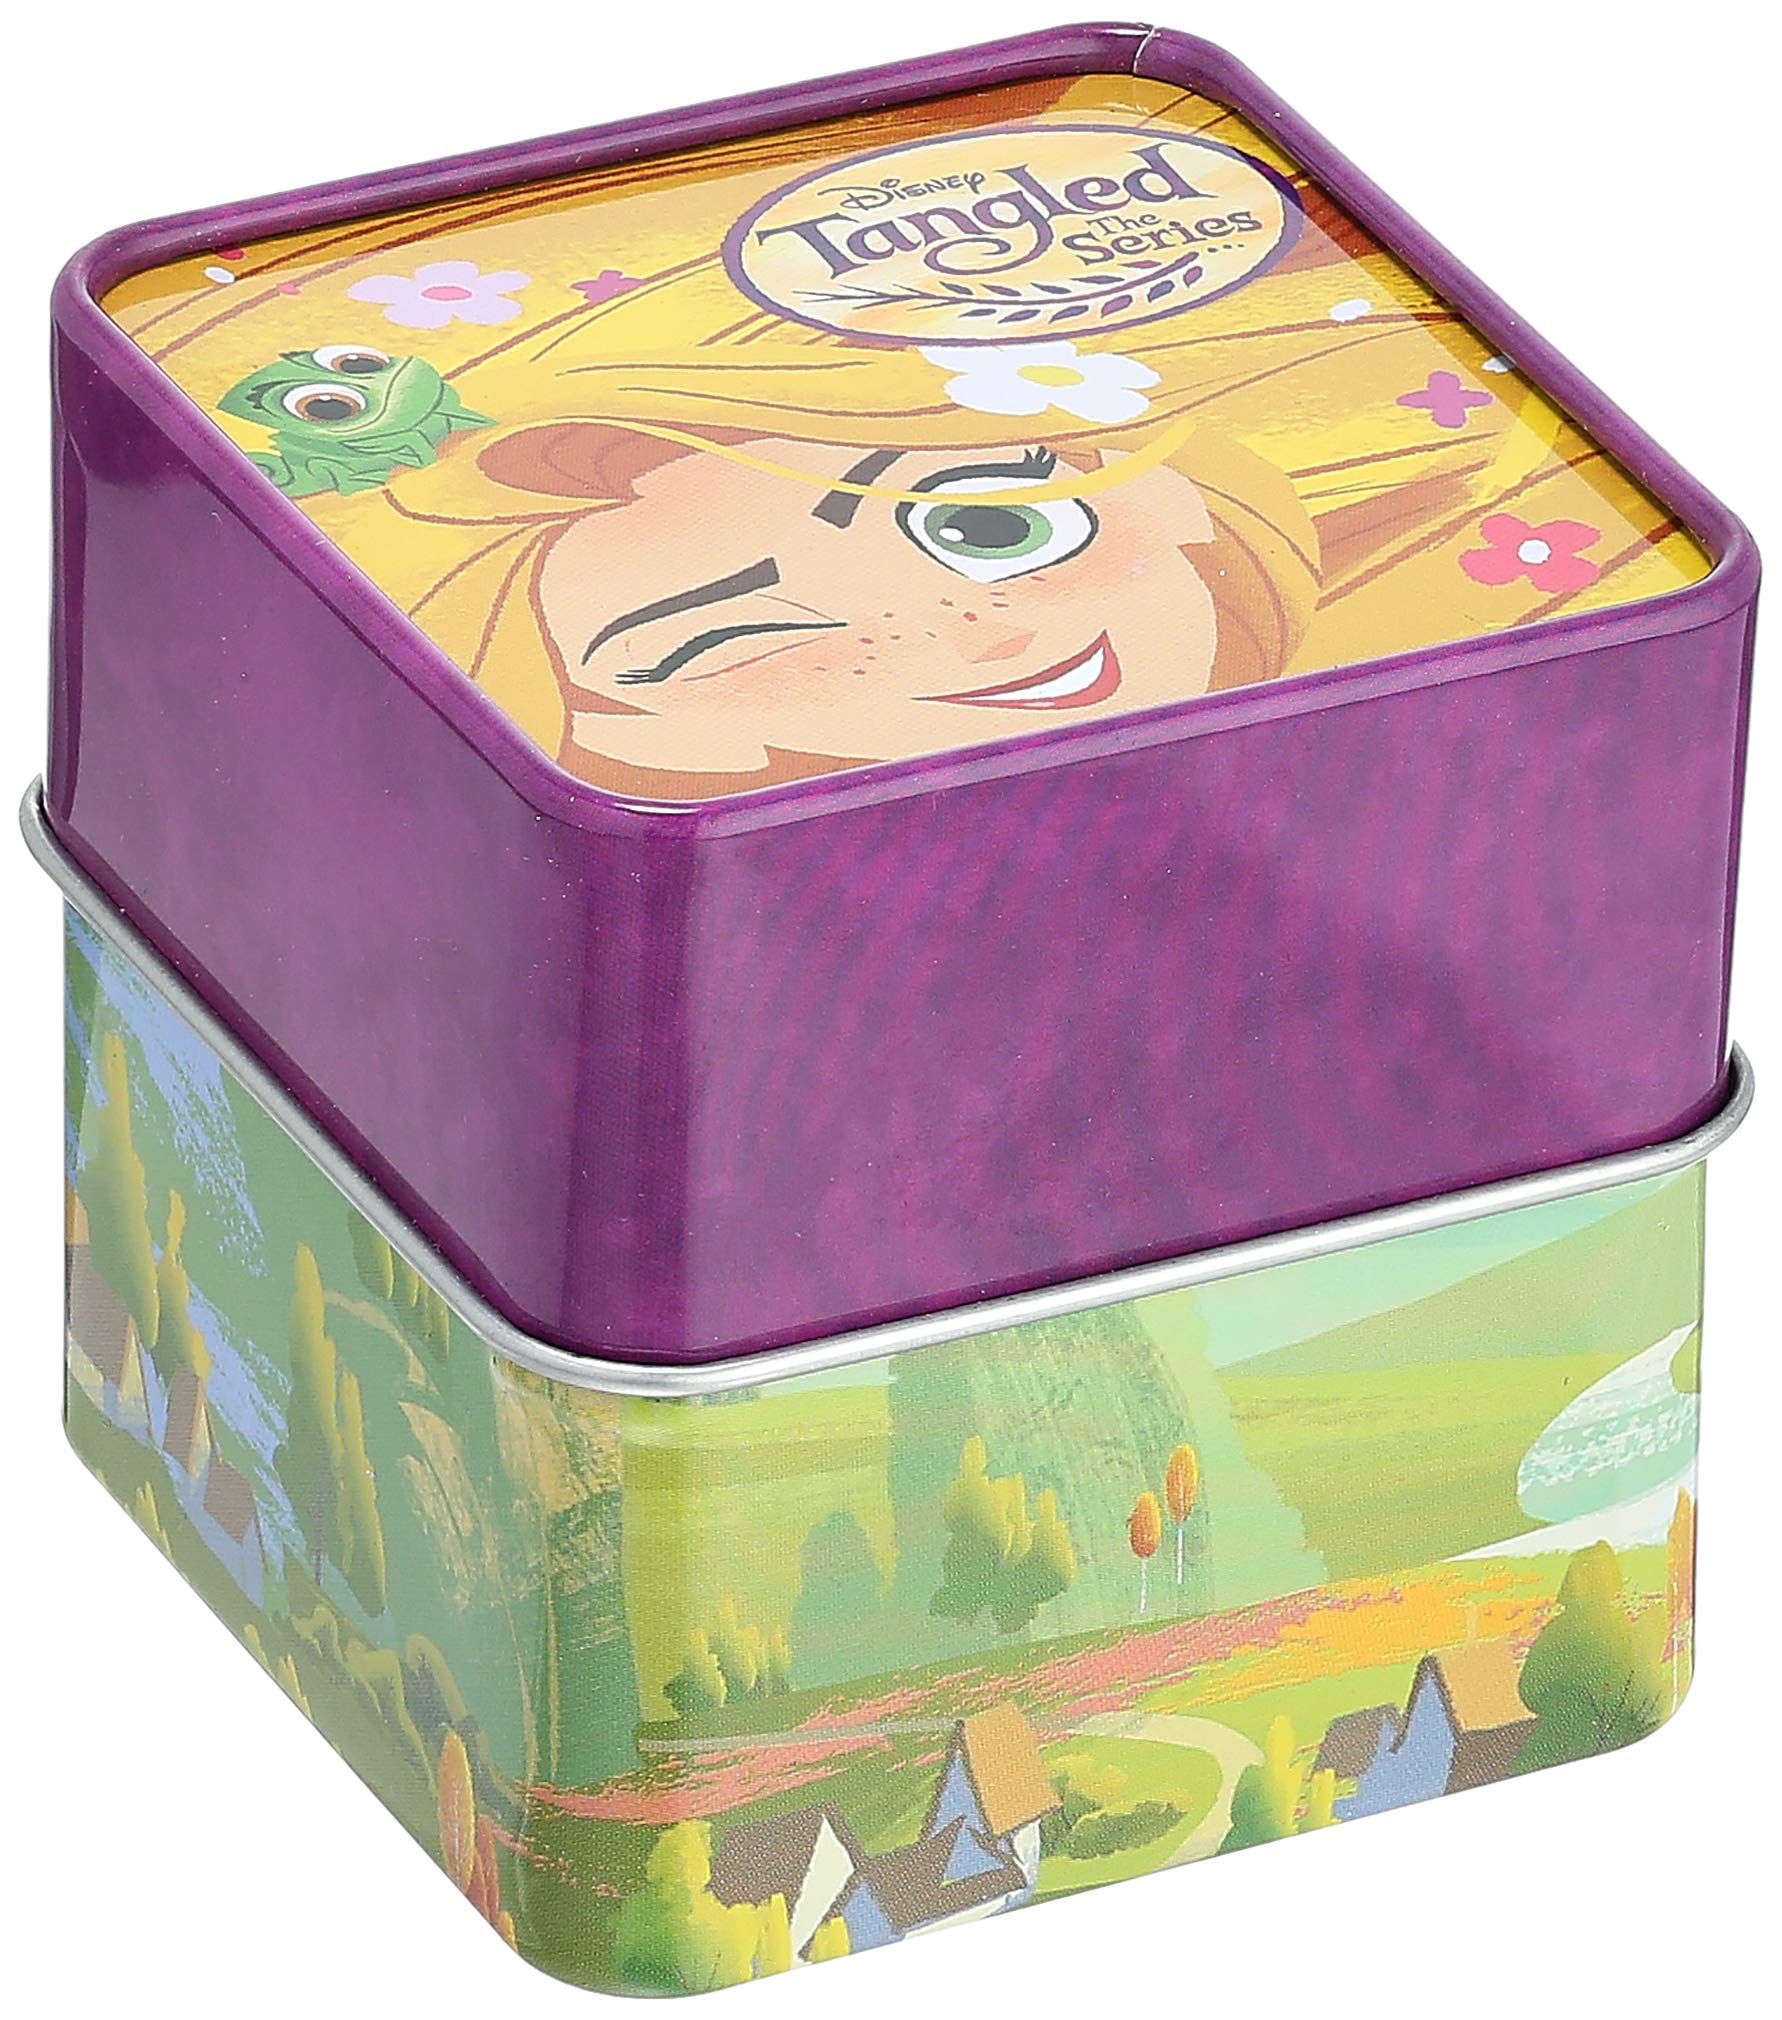 Disney's Tangled Learn How to Tell Time Analog Watch (Model: TTV9002AZ)